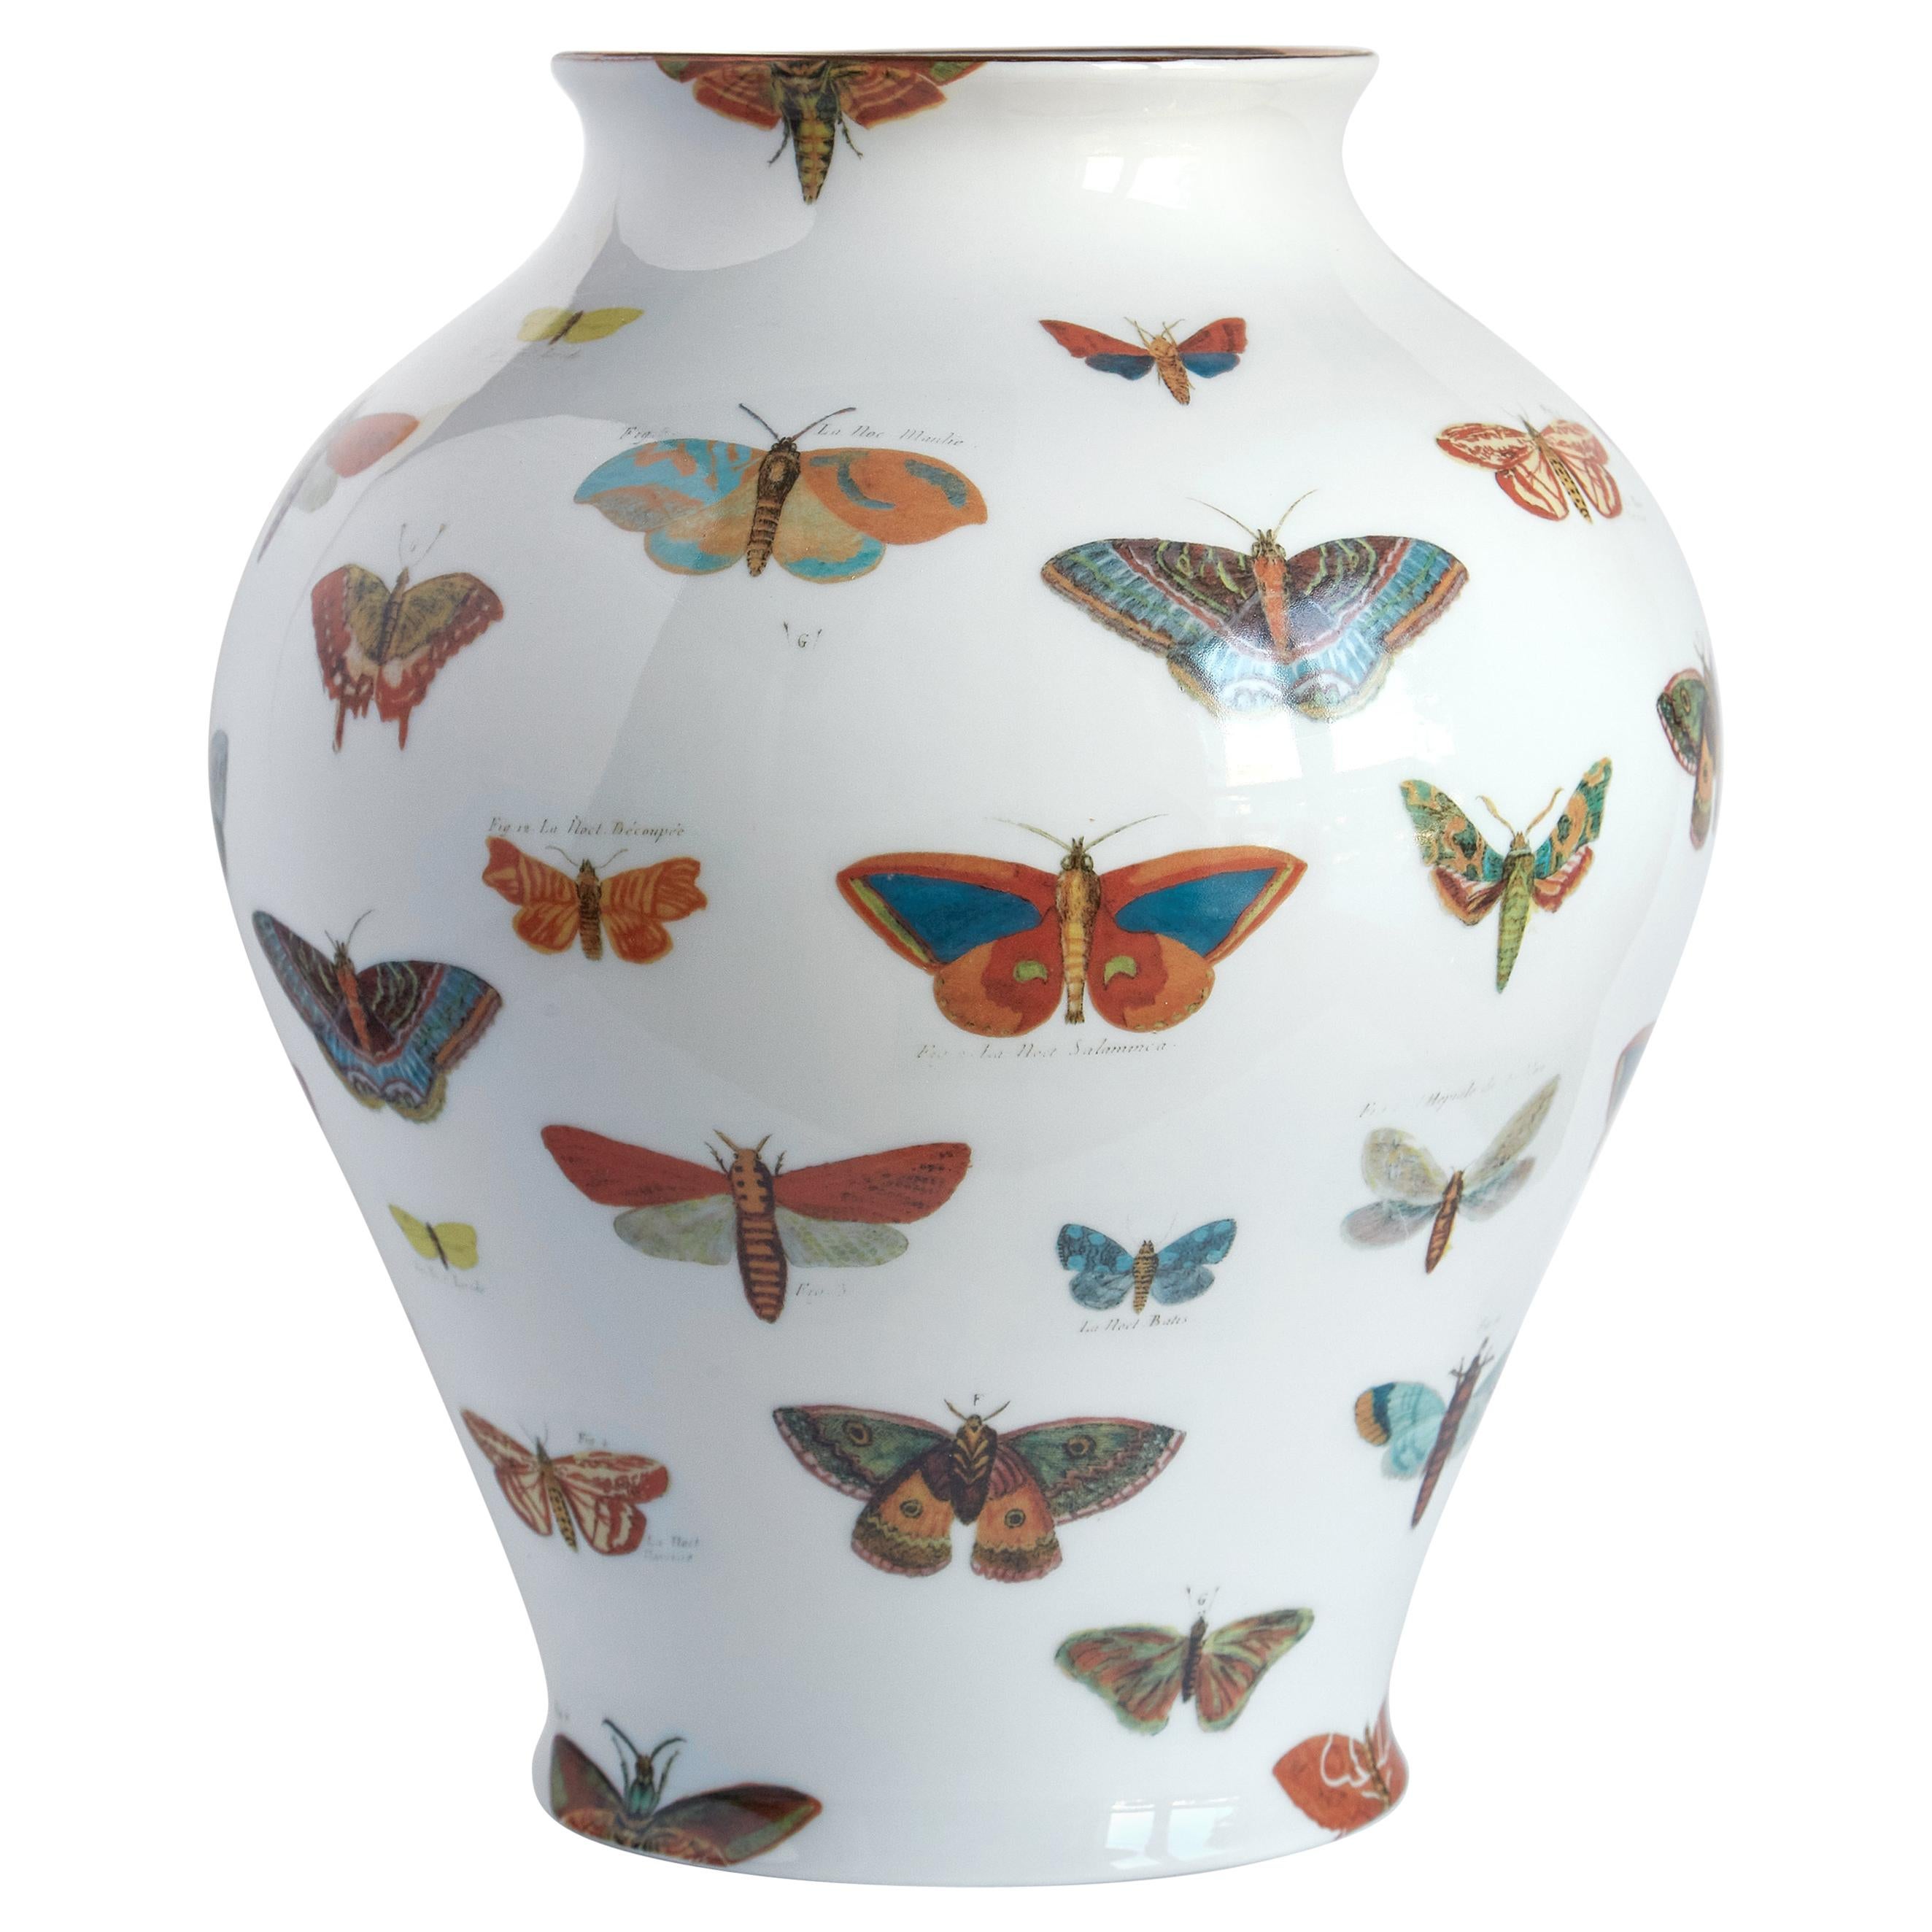 Butterflies, Contemporary Porcelain Vase with Decorative Design by Vito Nesta